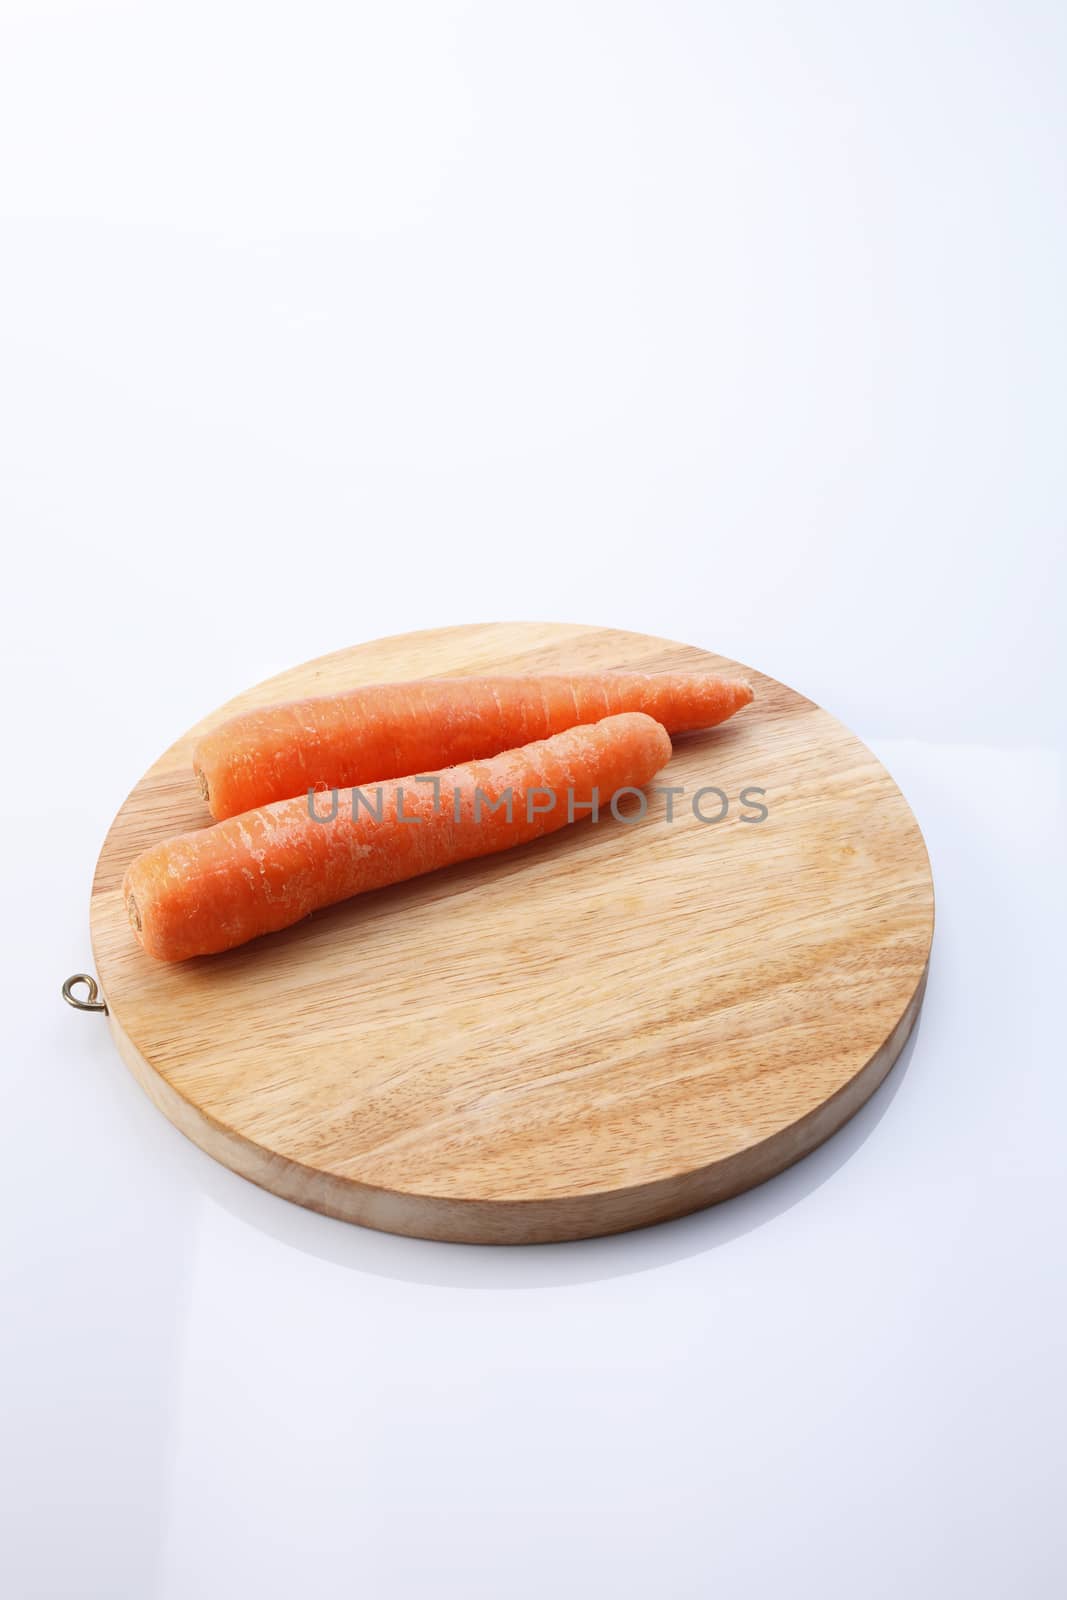 fresh carrot on the white background